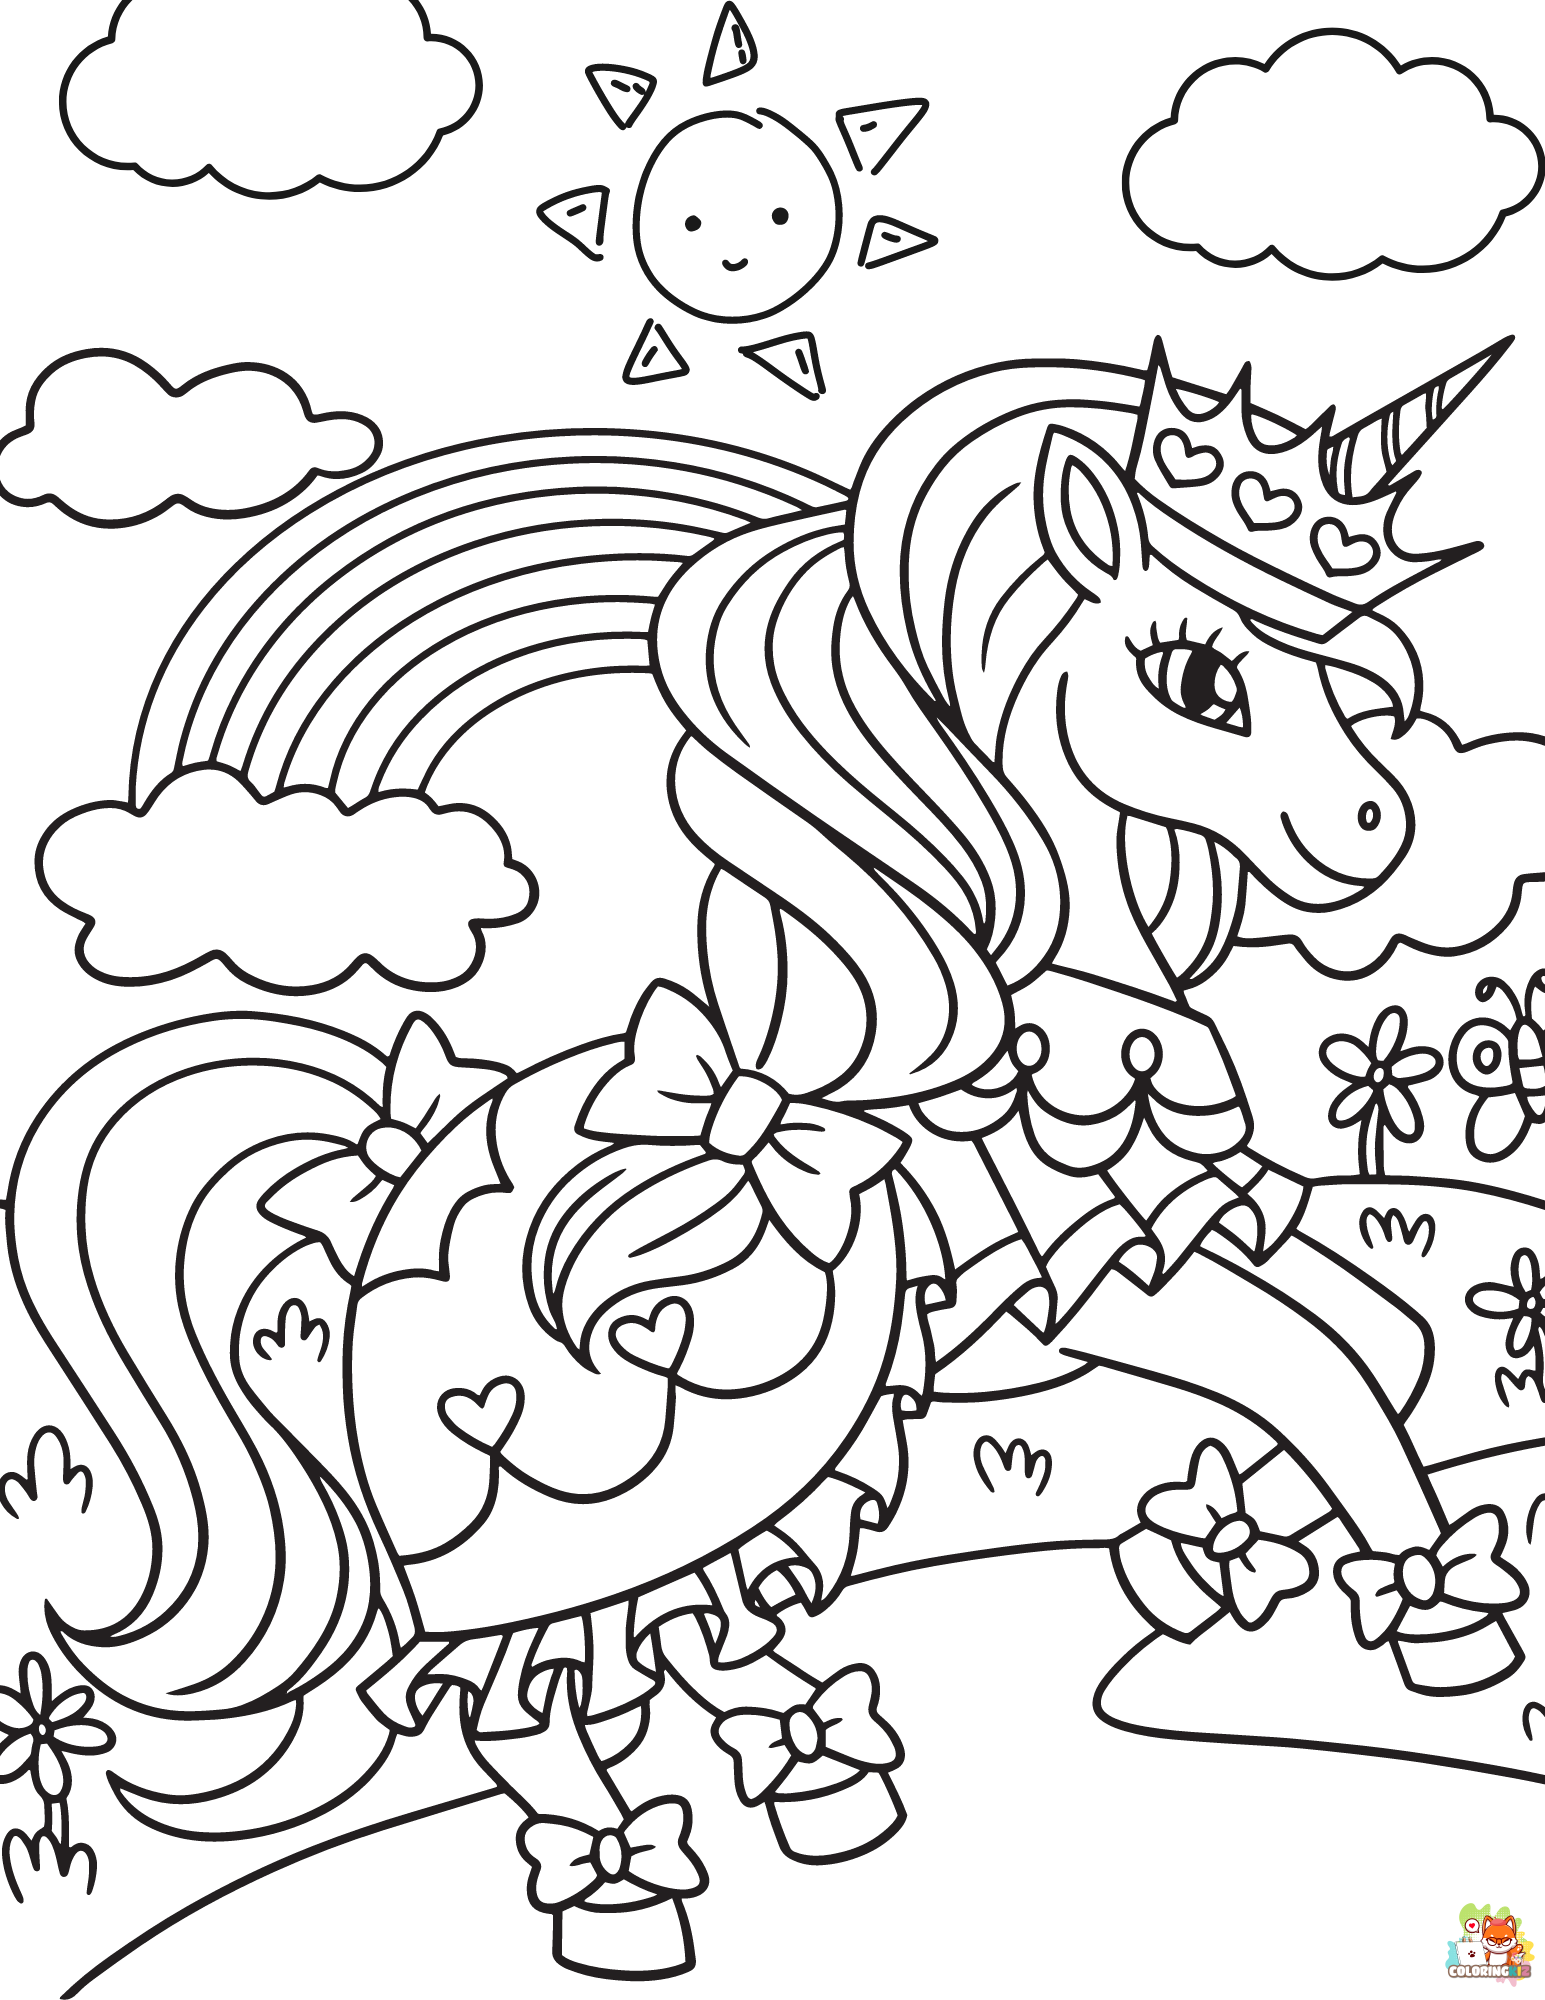 Unicorn Wearing Crown Coloring Pages 3